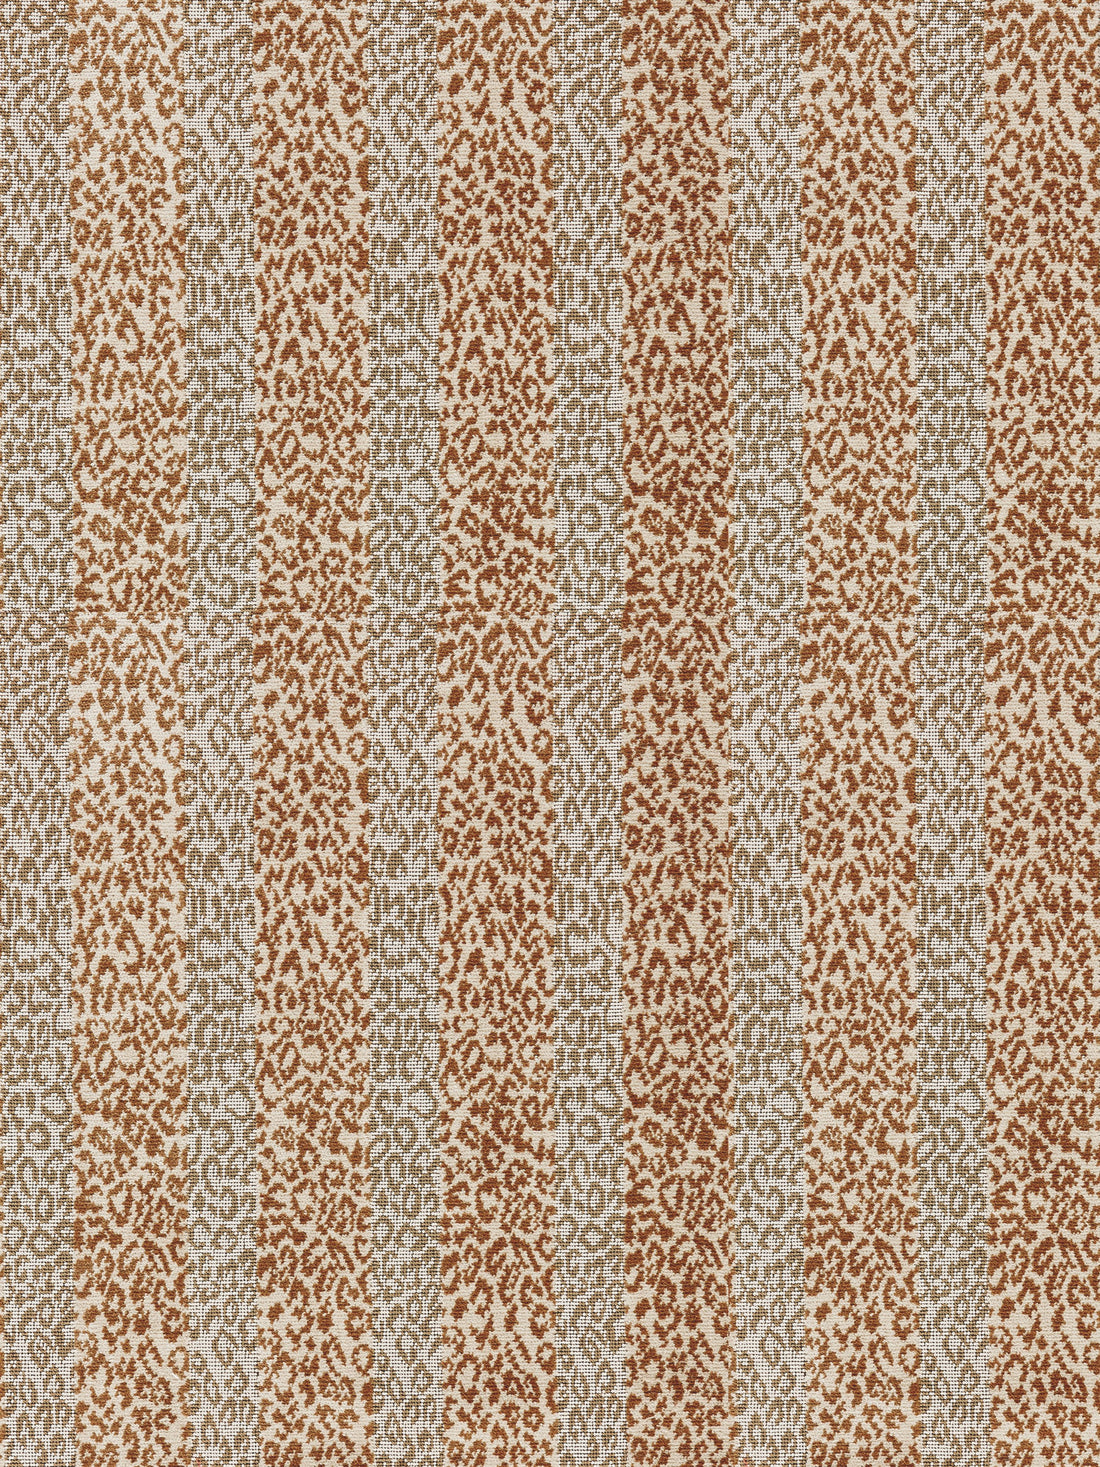 Corbet fabric in oatmeal color - pattern number SC 000126423 - by Scalamandre in the Scalamandre Fabrics Book 1 collection